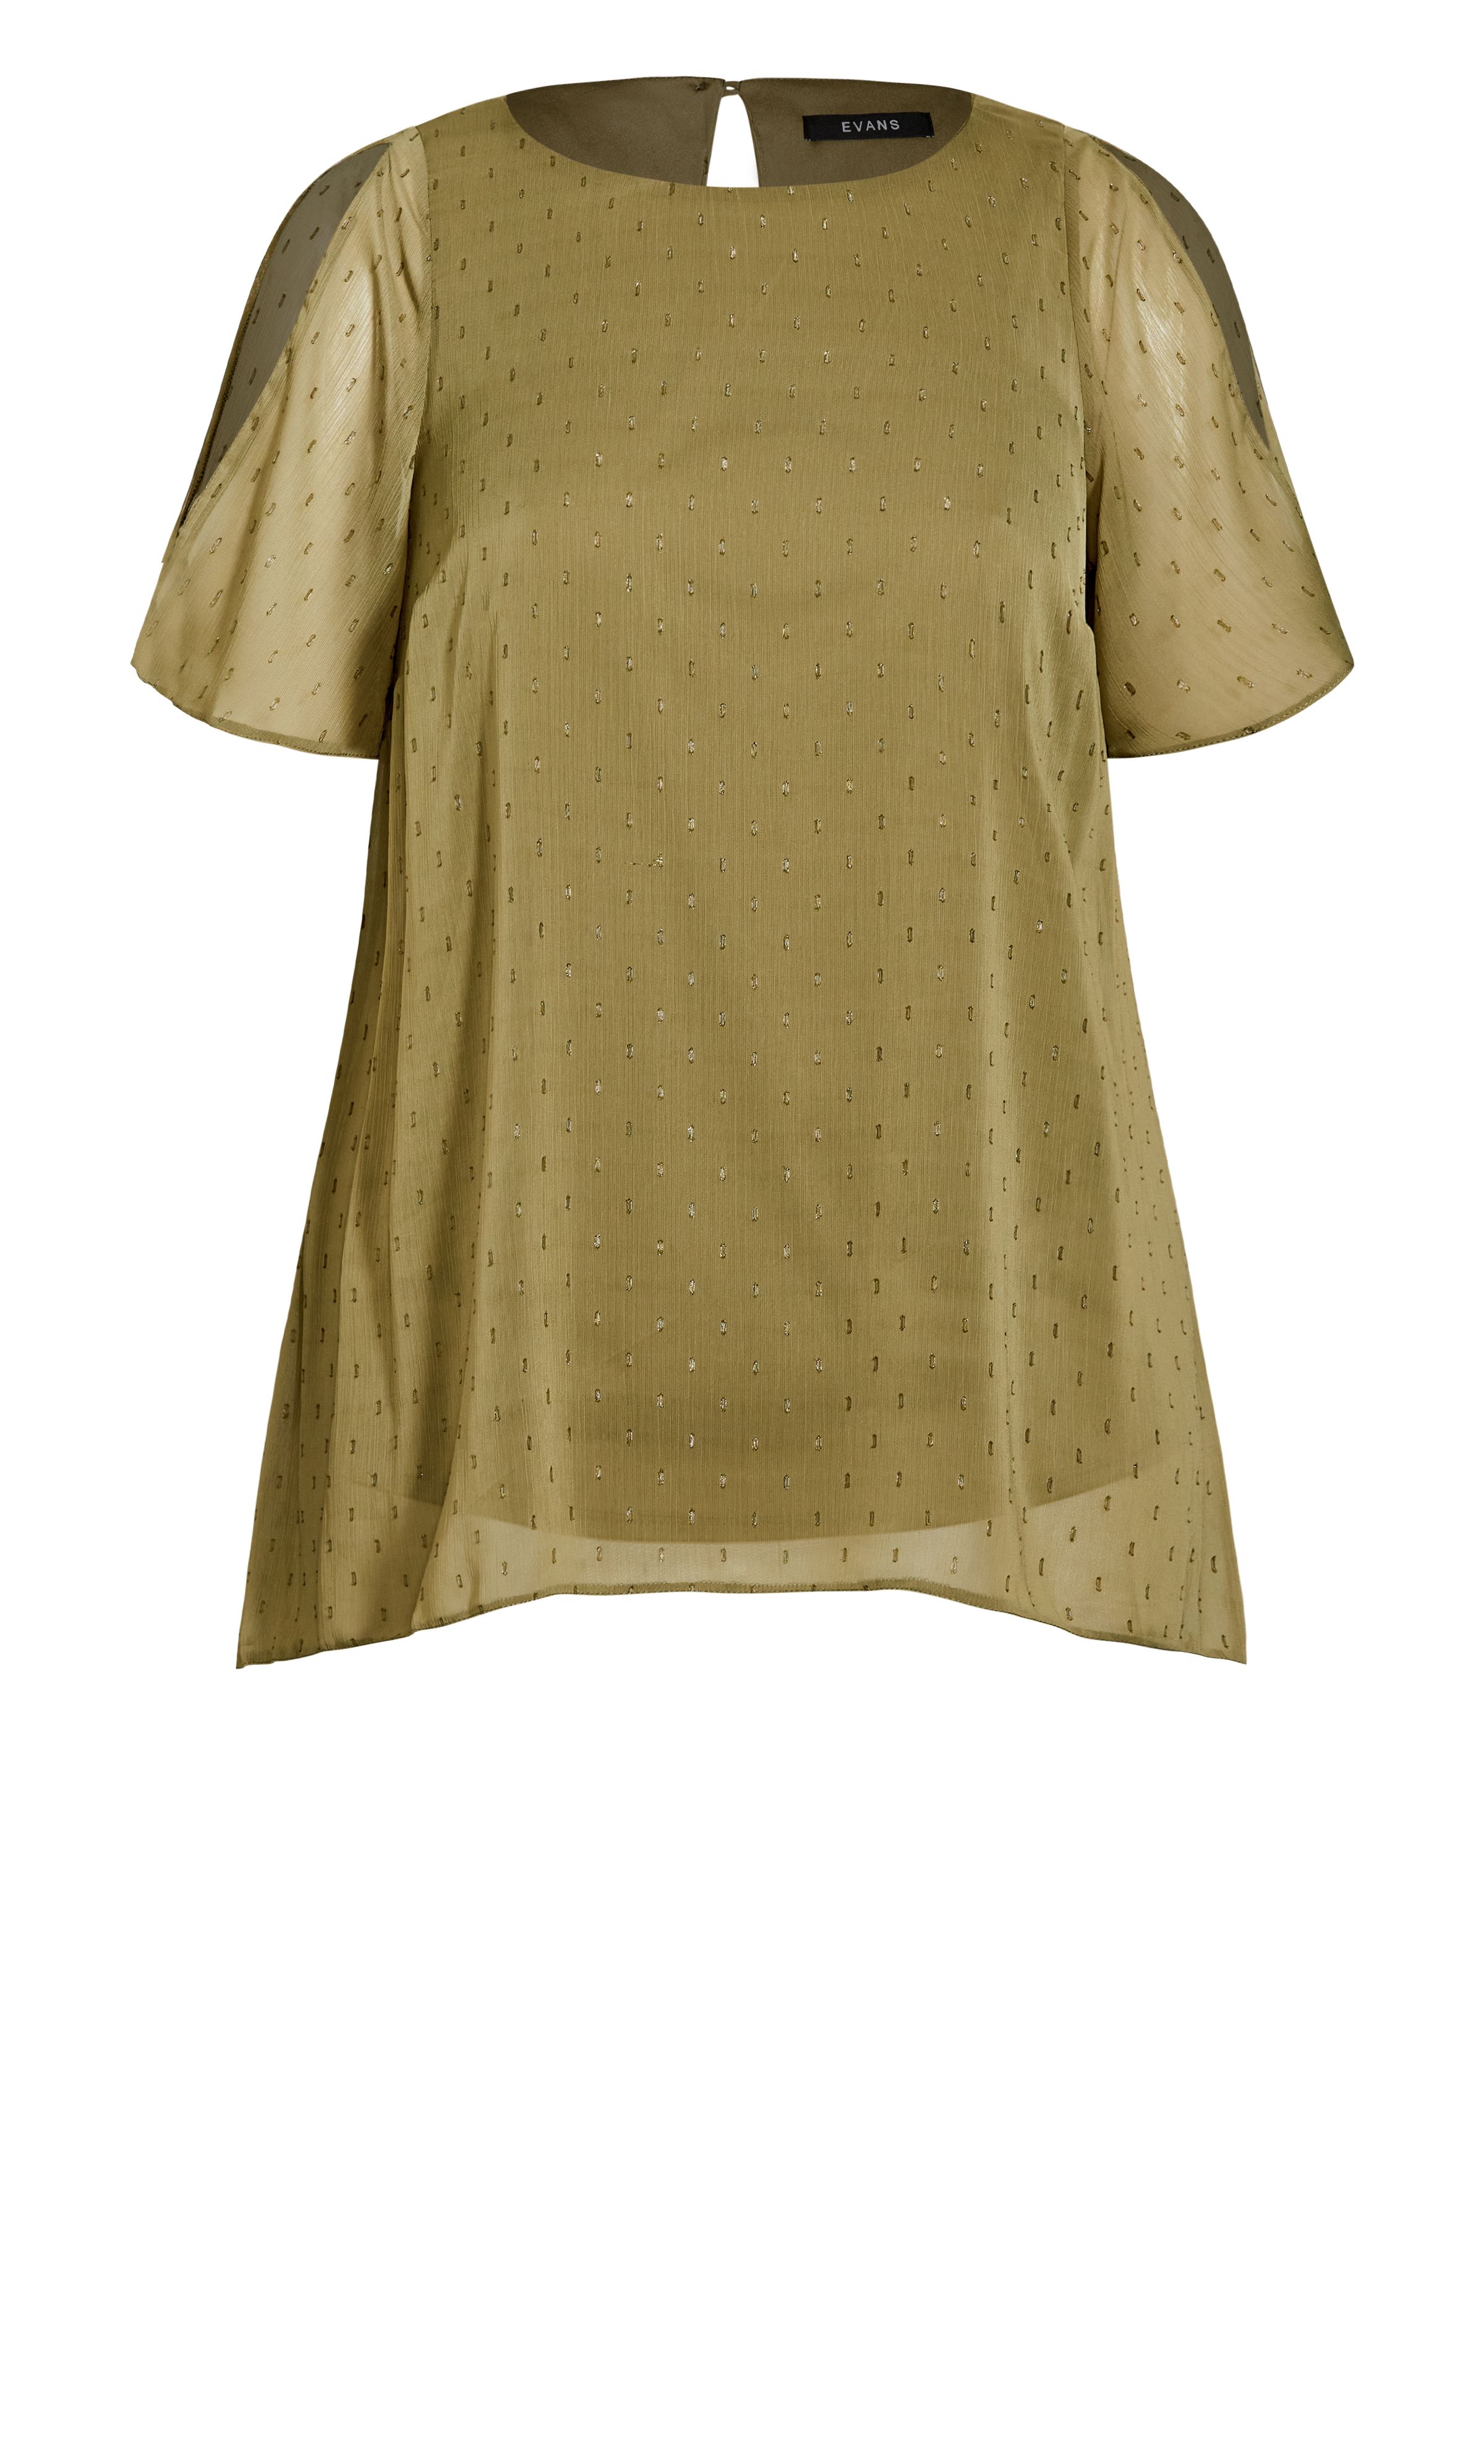 Add a touch of sparkle into your everyday wardrobe with the Sparkle Olay Top. Great for work, weekends and everything in-between, this split sleeve top is a sure-fire wardrobe winner. Key Features Include: - Round neckline - Short sheer split sleeves - Back keyhole with button closure - All over metallic spot detailing - Fully lined Heading out for dinner? Style with sleek black trousers and pumps for an elevated evening look.